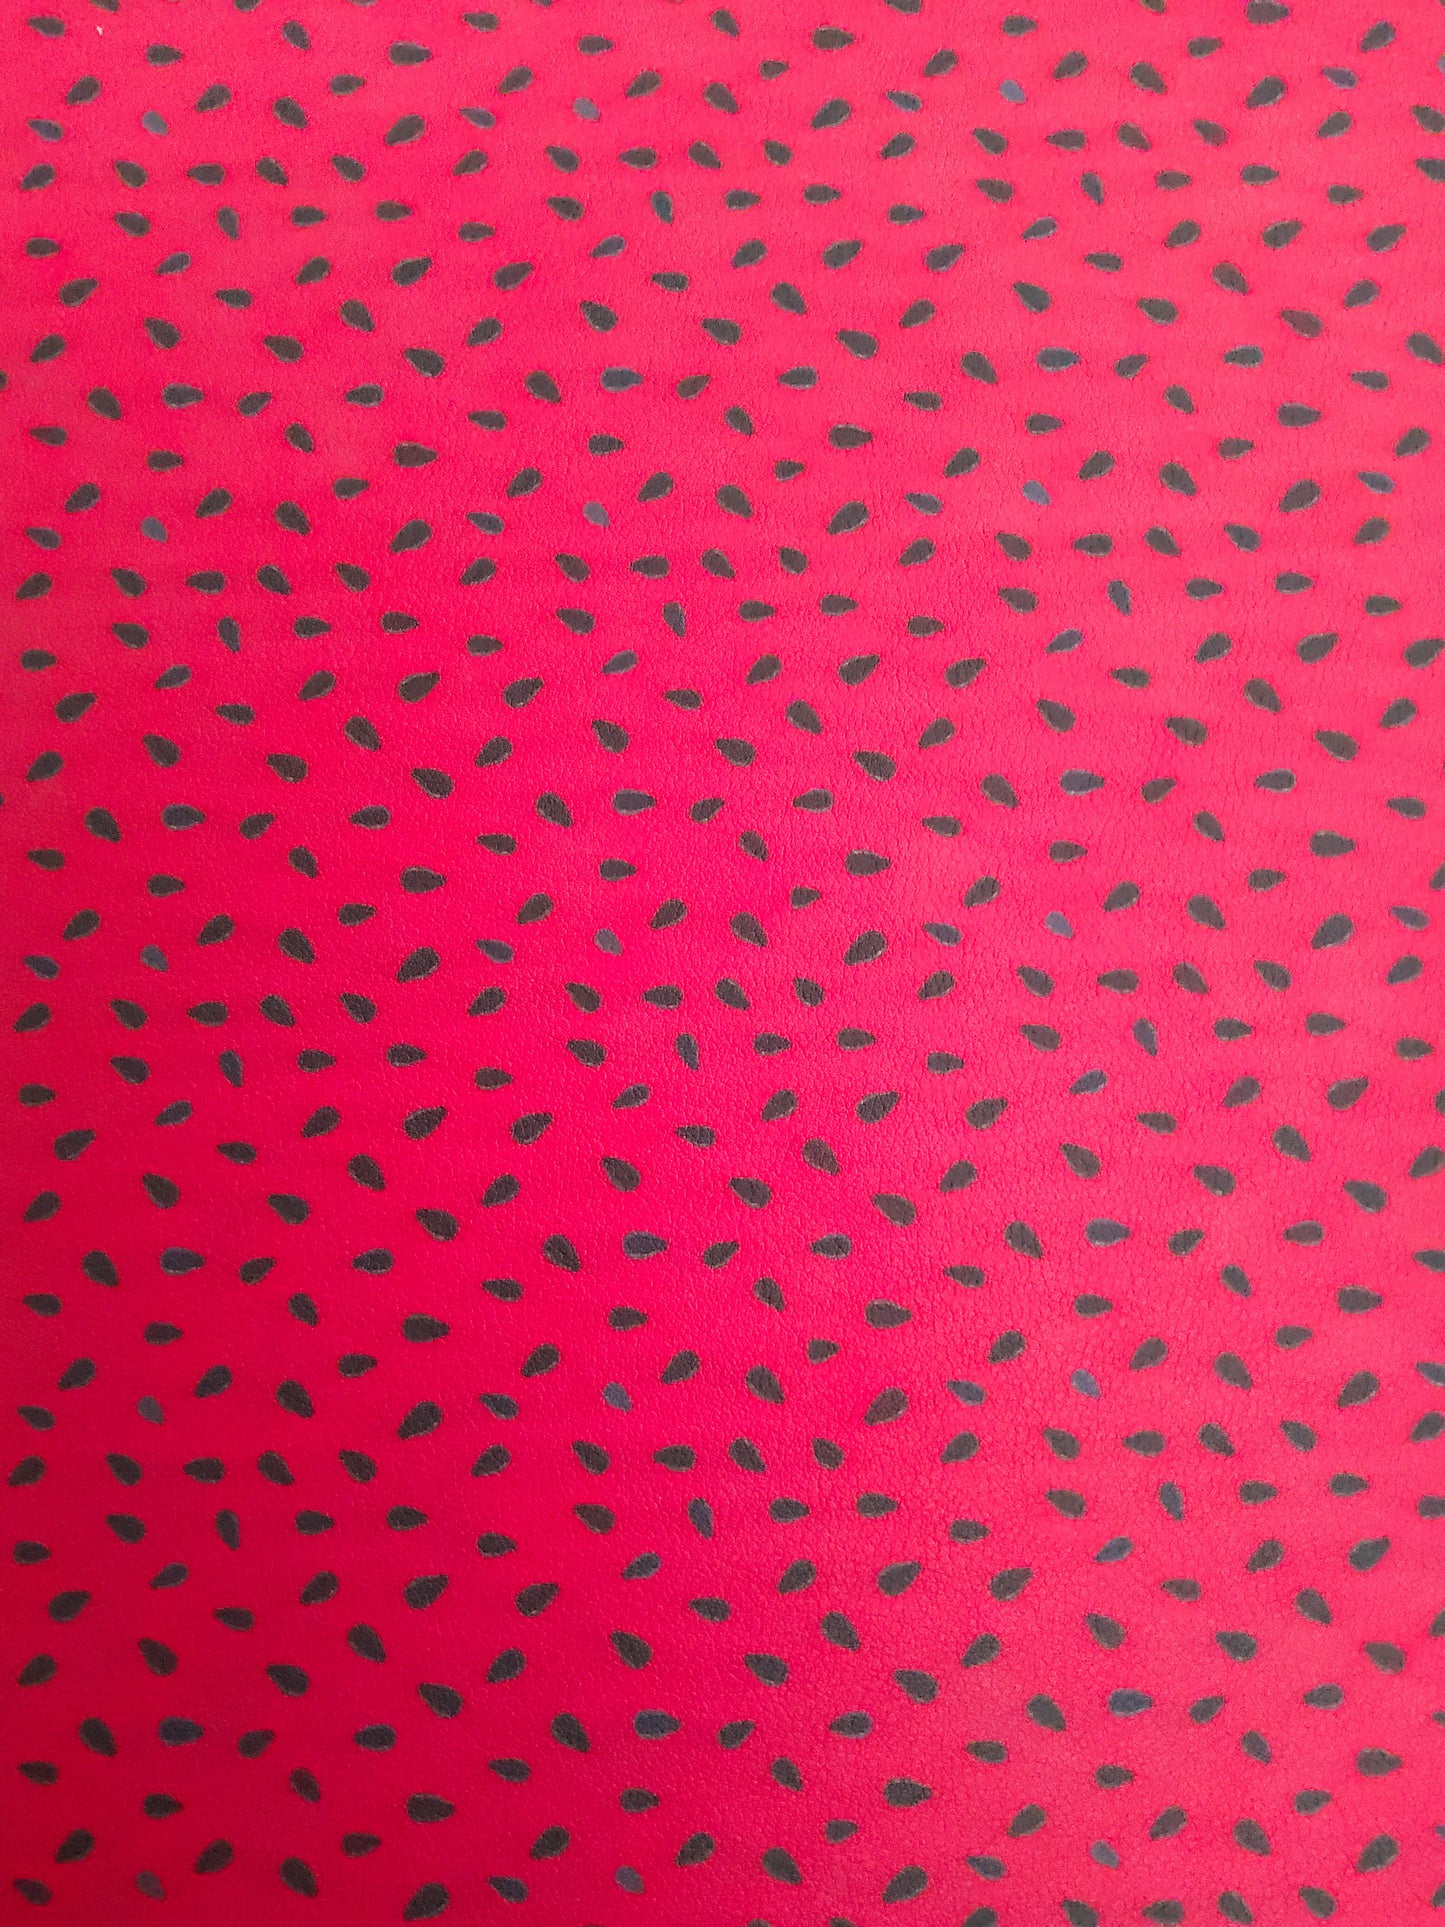 Watermelon Seeds 9x12 faux leather sheet